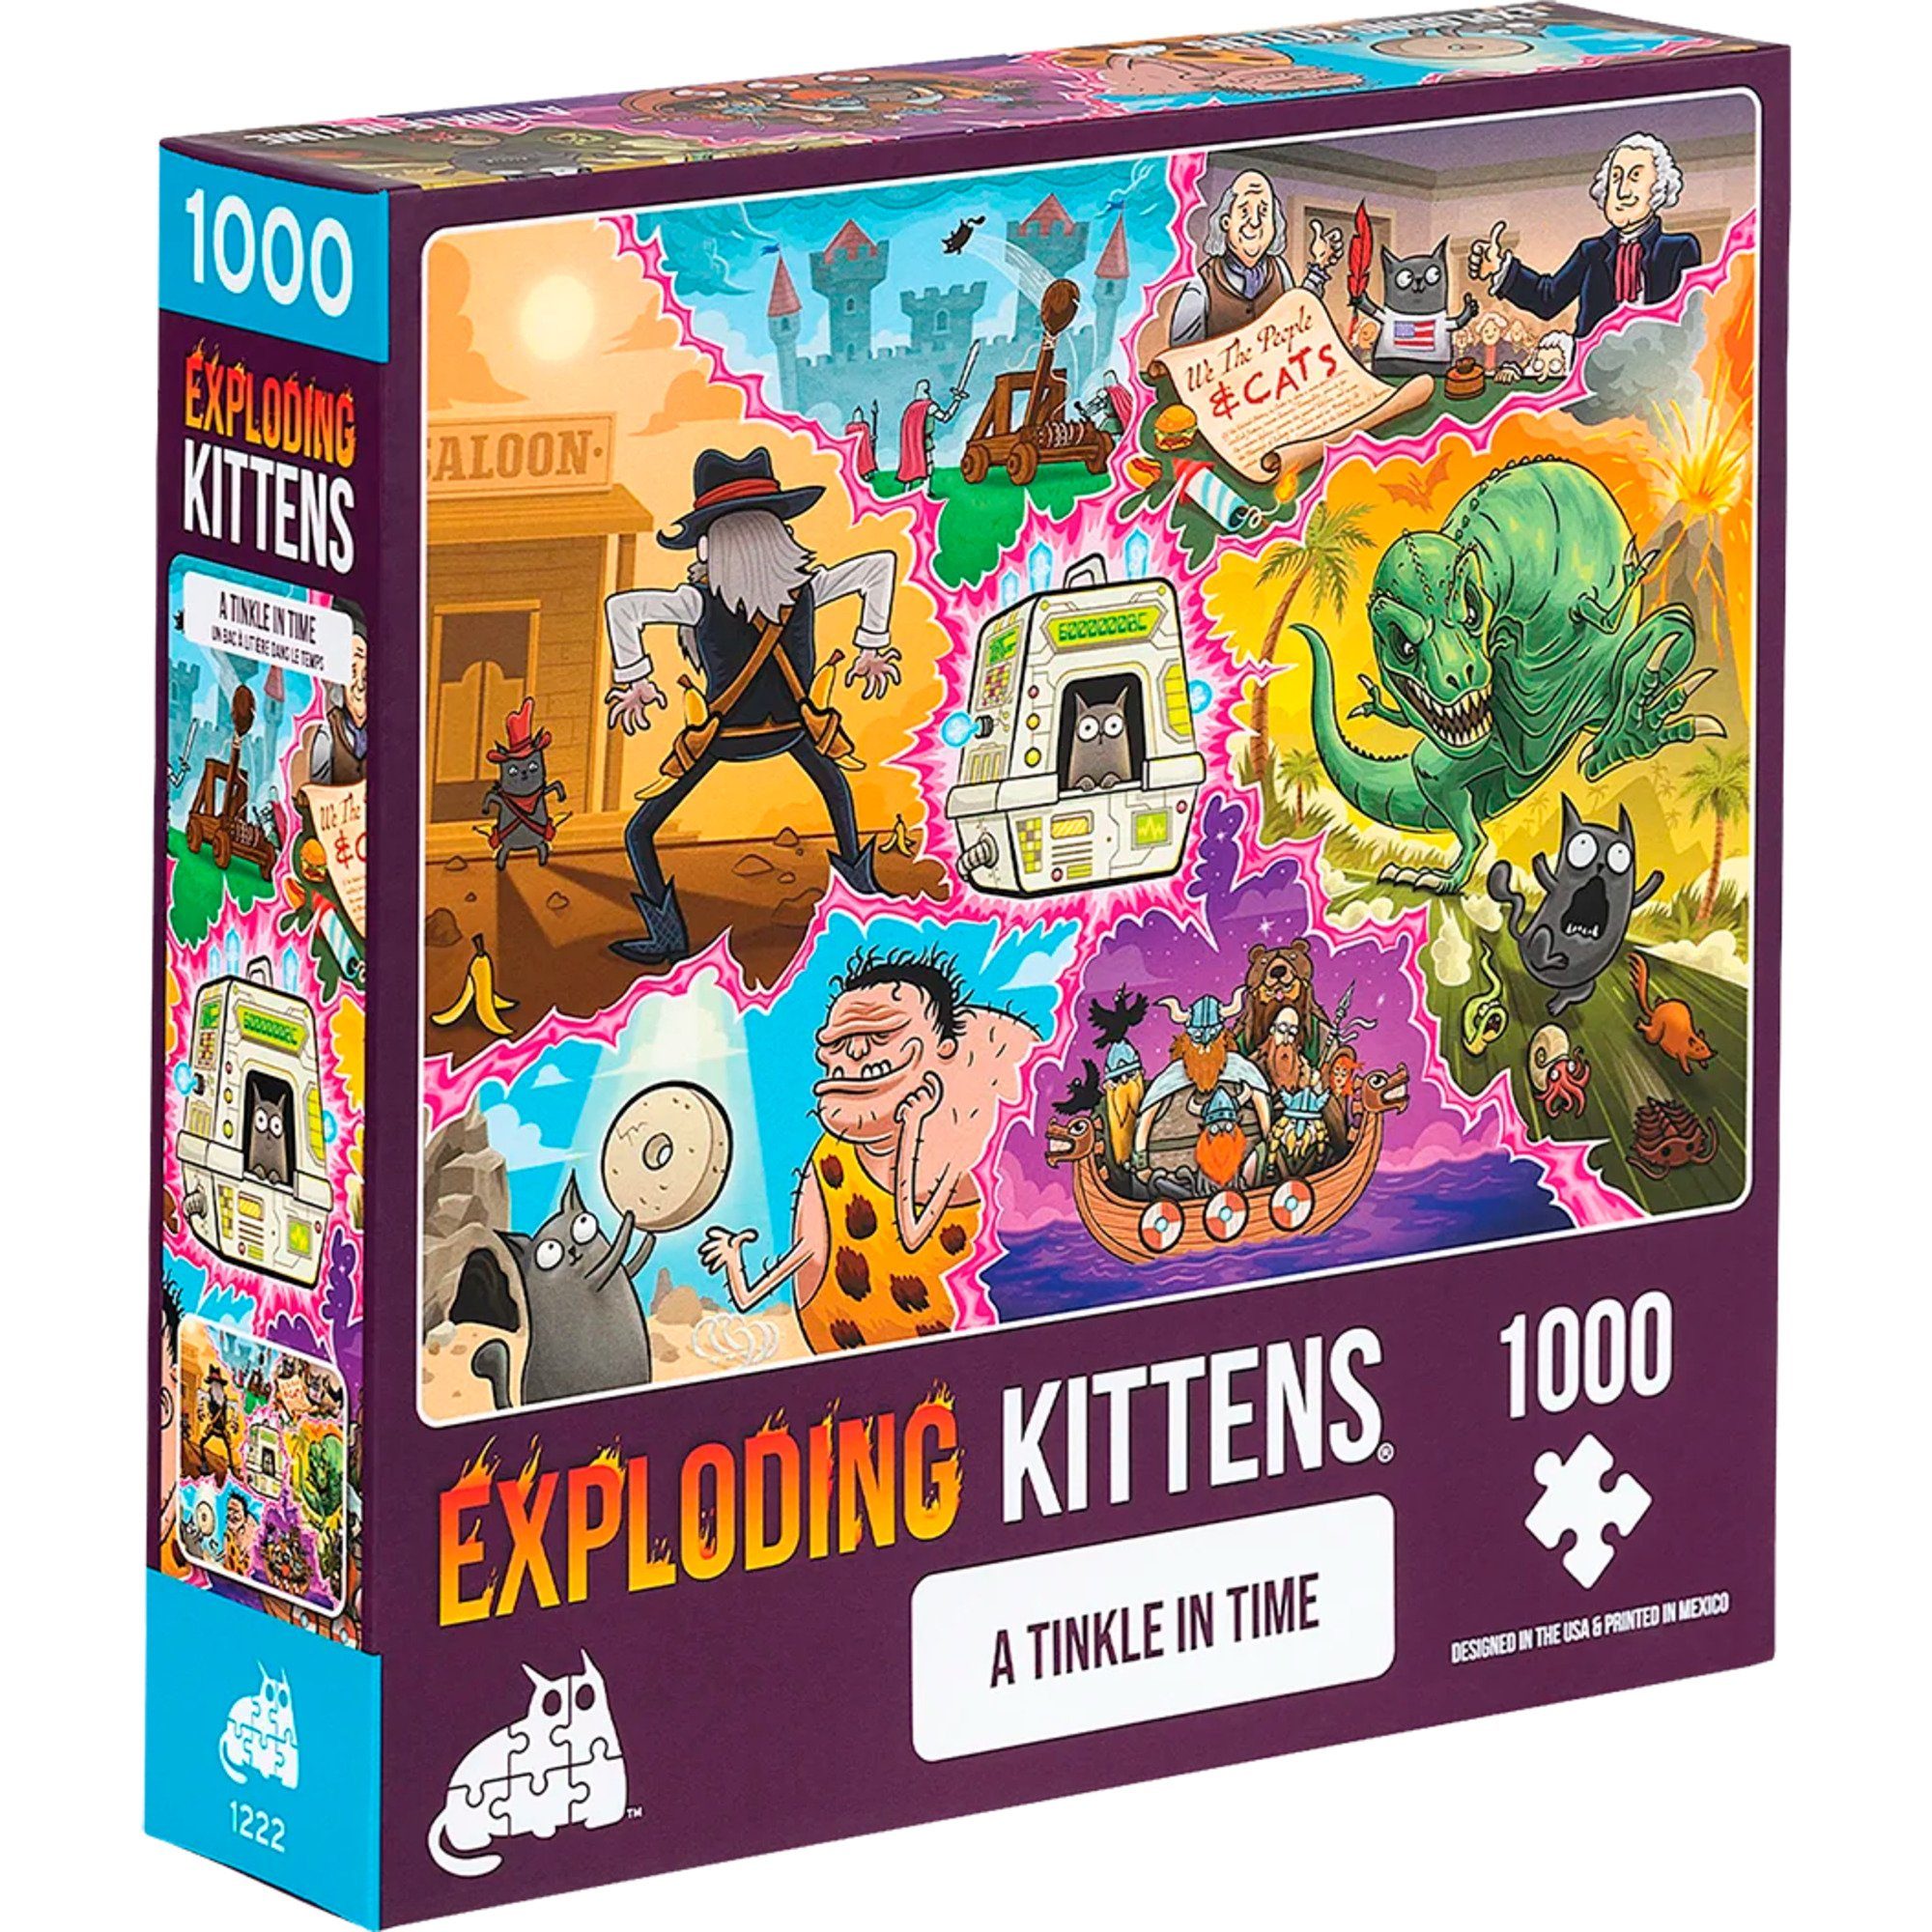 Asmodee Puzzle Puzzle Exploding Kittens - A Tinkle in Time, 1000 Puzzleteile